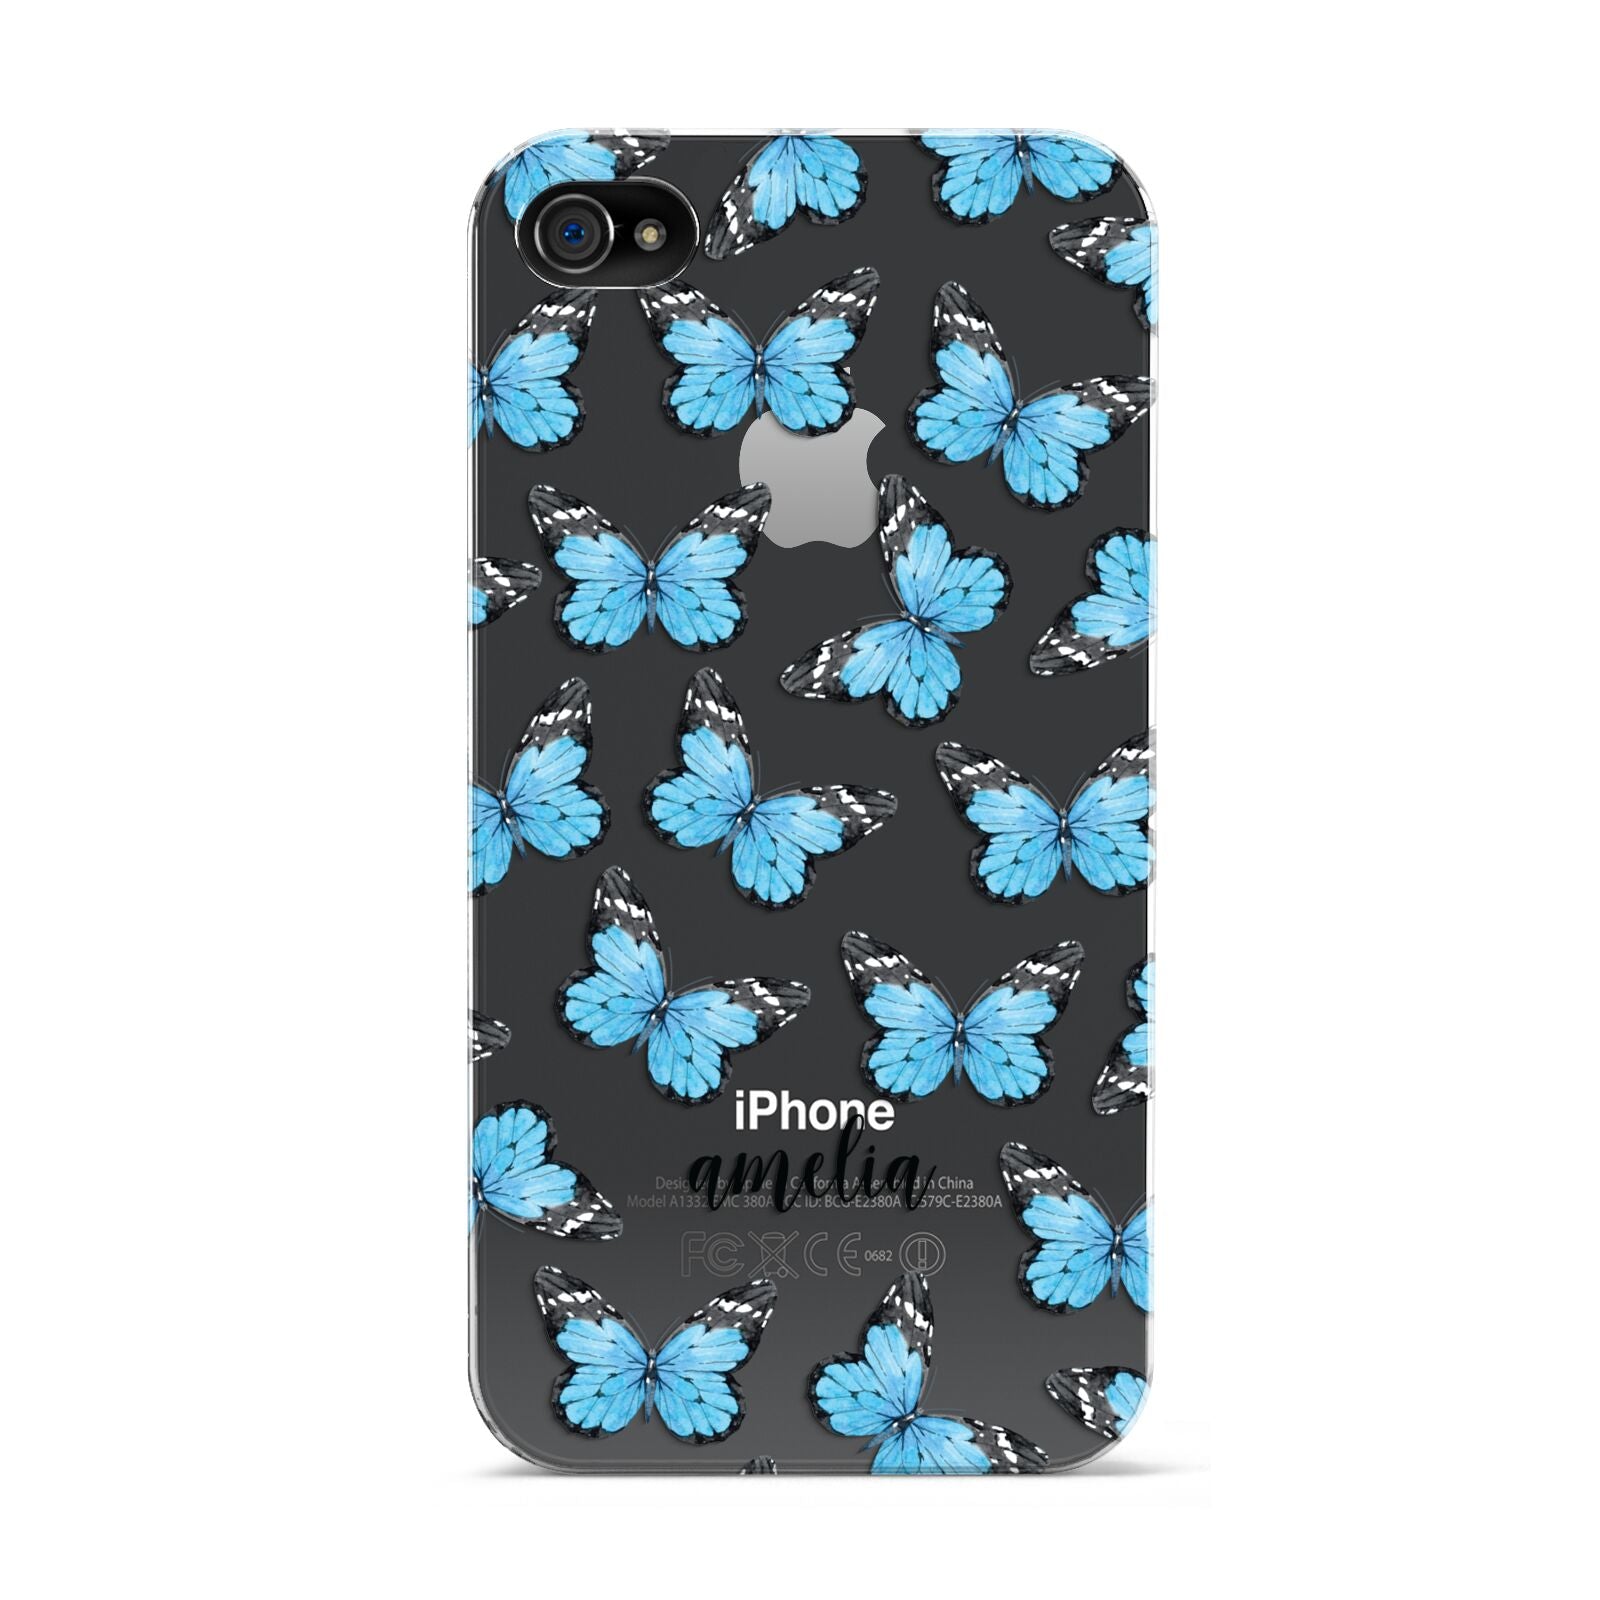 Blue Butterflies with Name Apple iPhone 4s Case